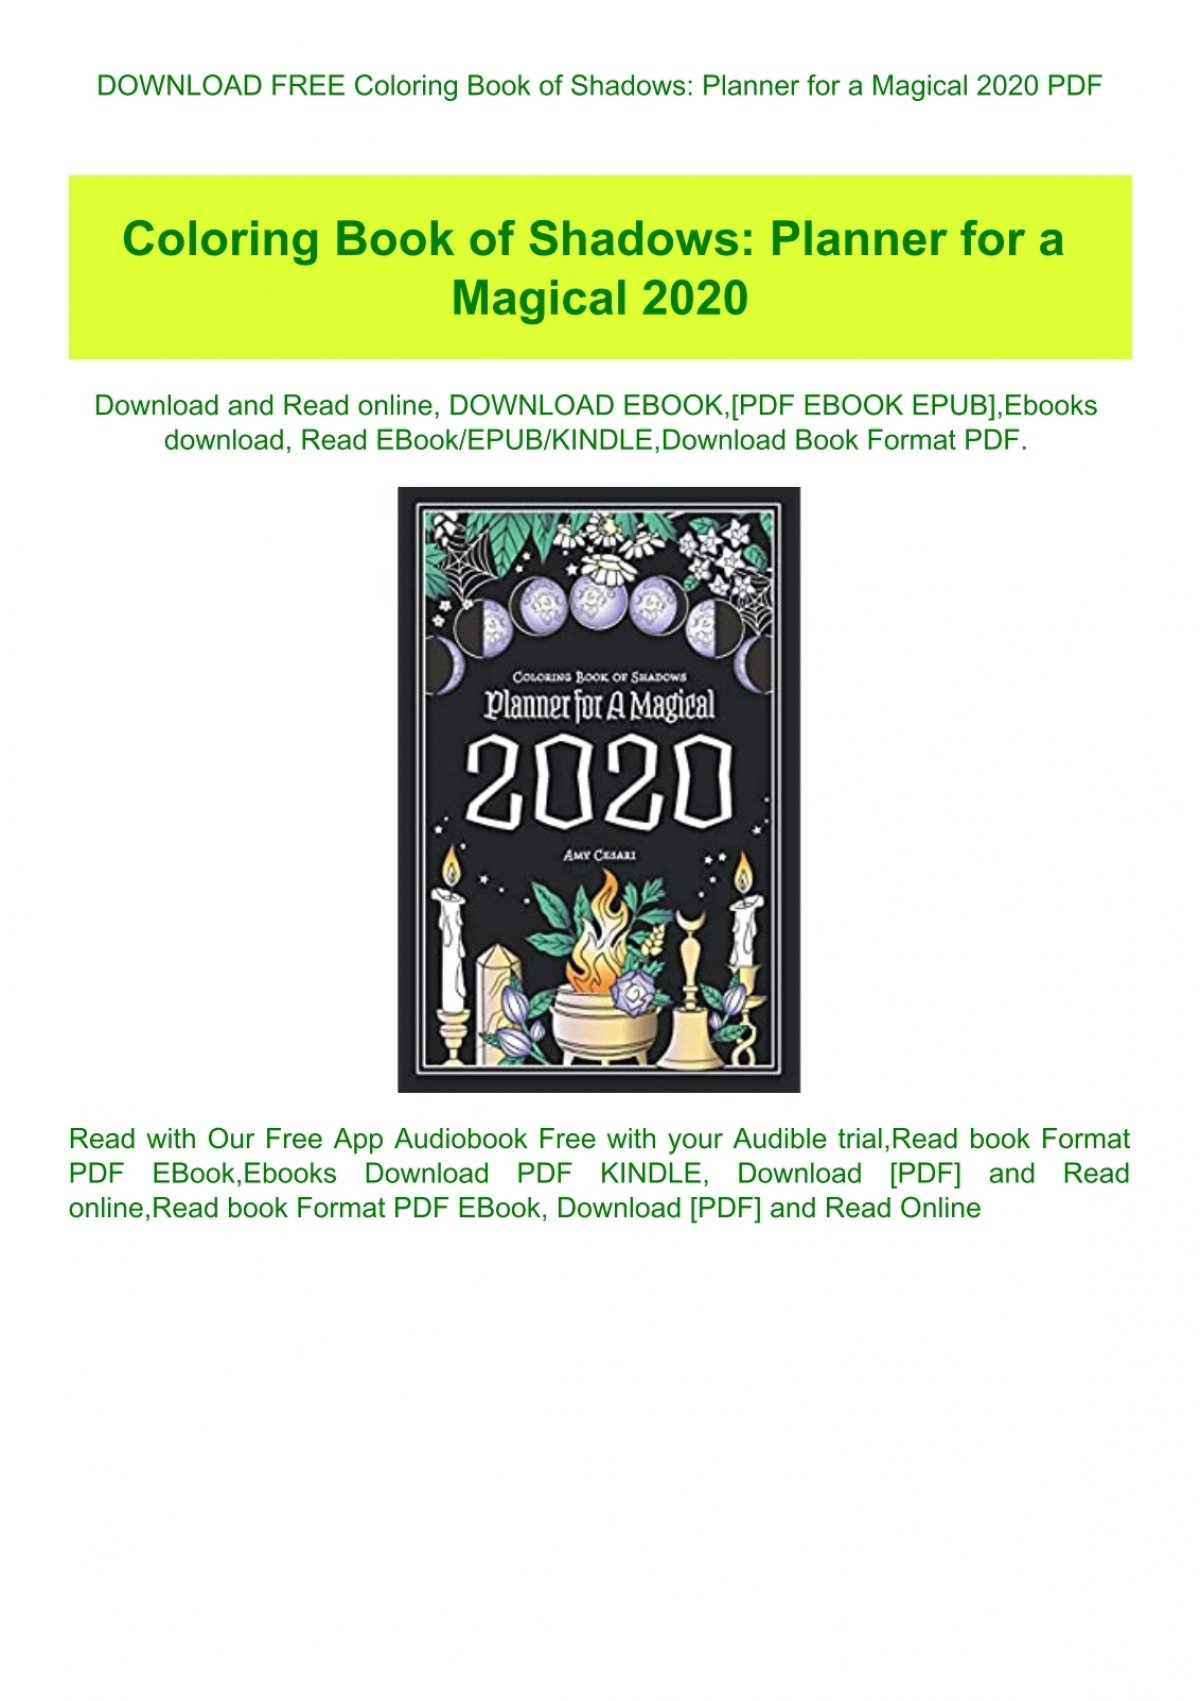 Download Download Free Coloring Book Of Shadows Planner For A Magical 2020 Pdf